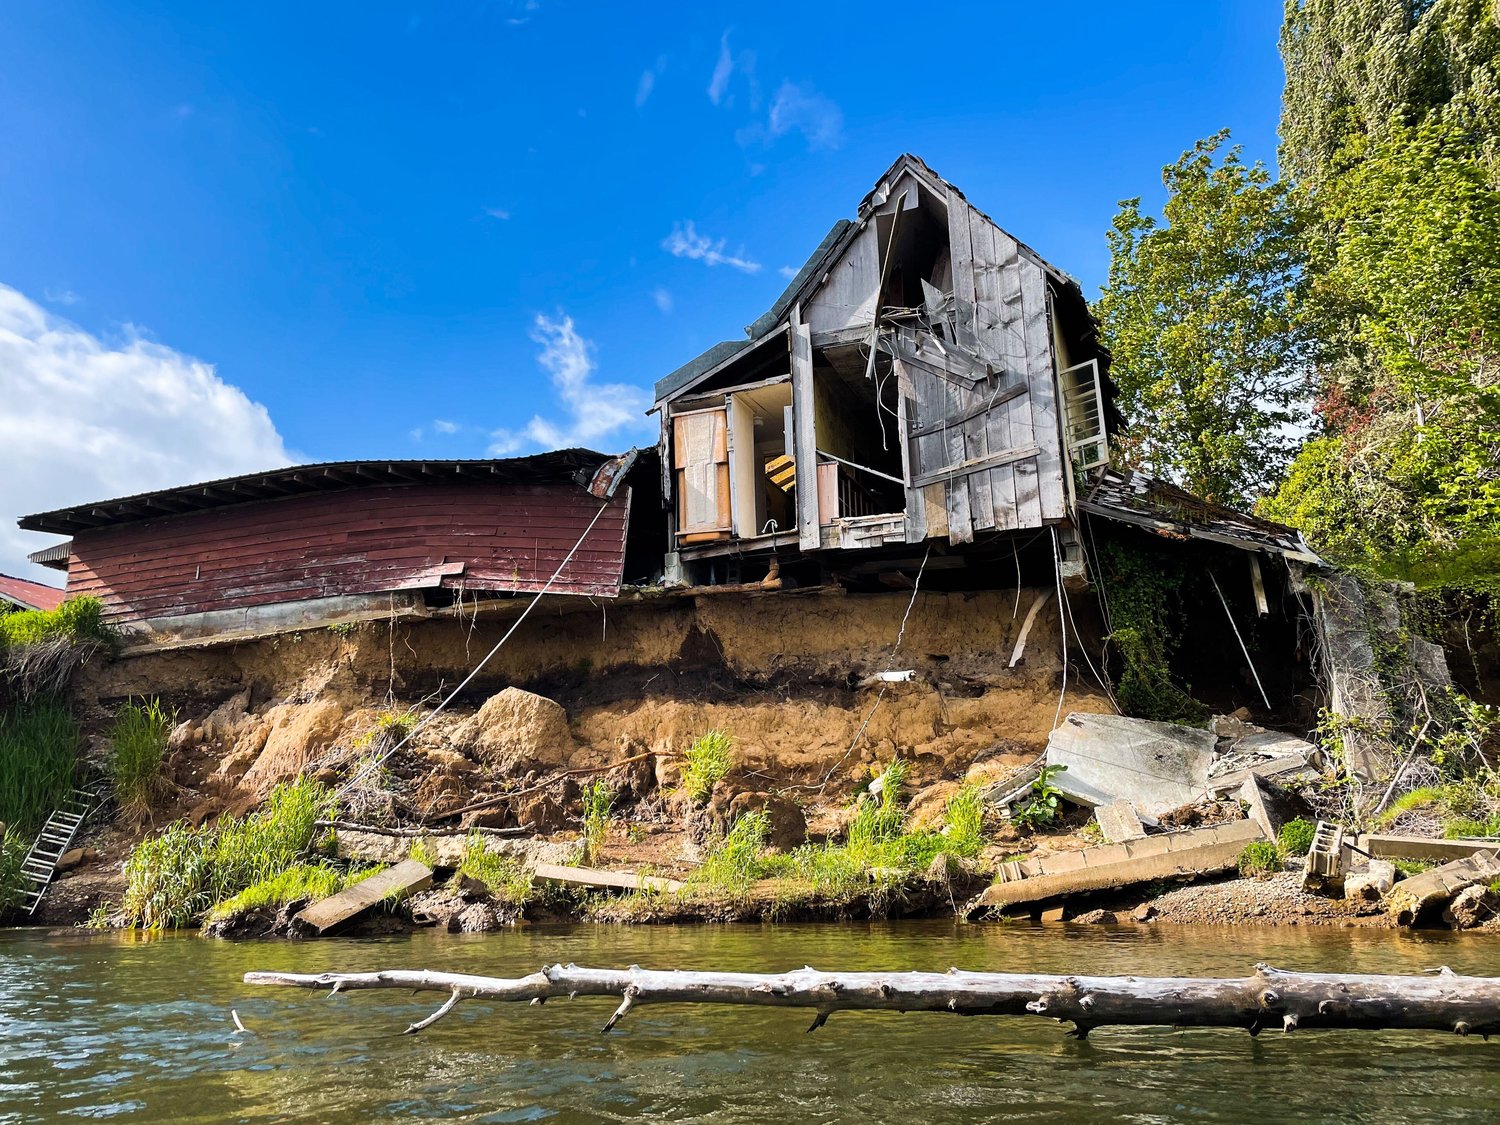 A dilapidated house crumbles into the Chehalis River along an eroded bank downstream of the Satsop River confluence.